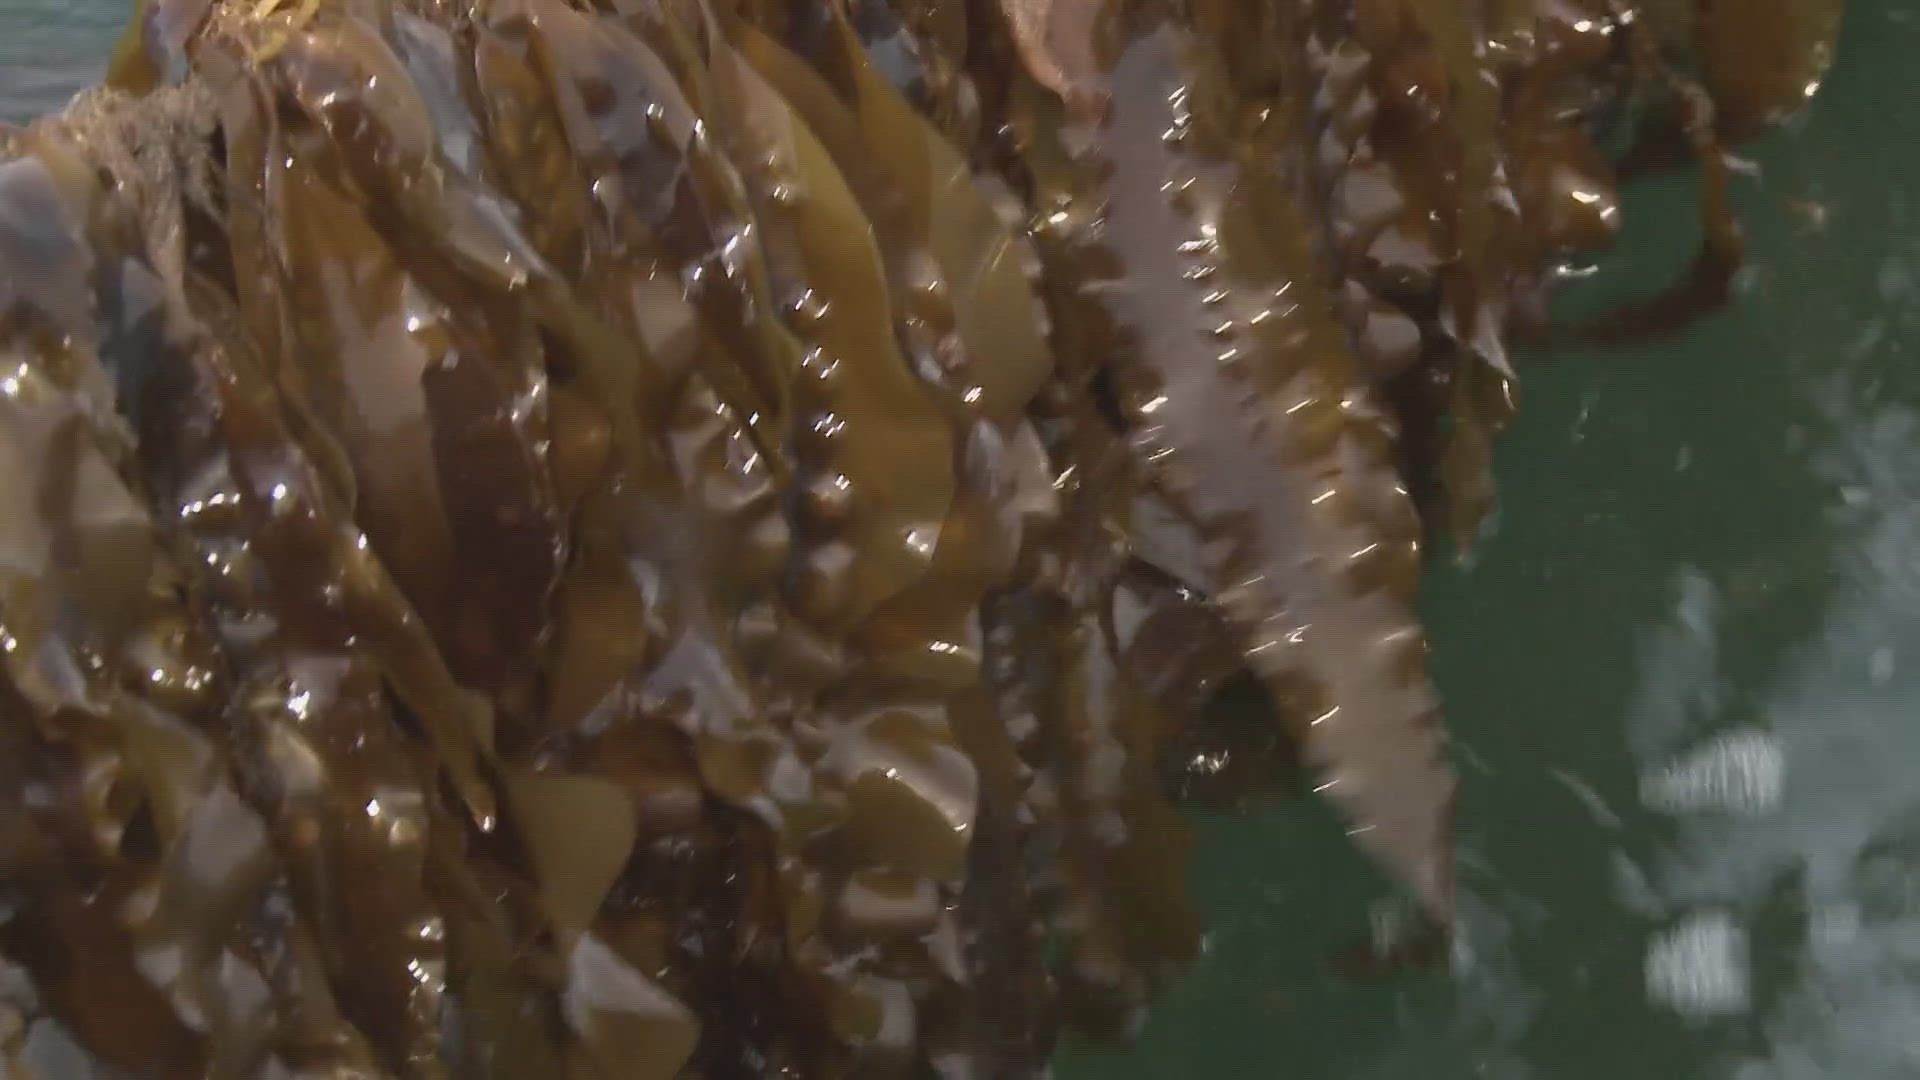 The conference in Portland is expected to welcome more than 300 people from all around the world to talk about how to grow the seaweed industry.